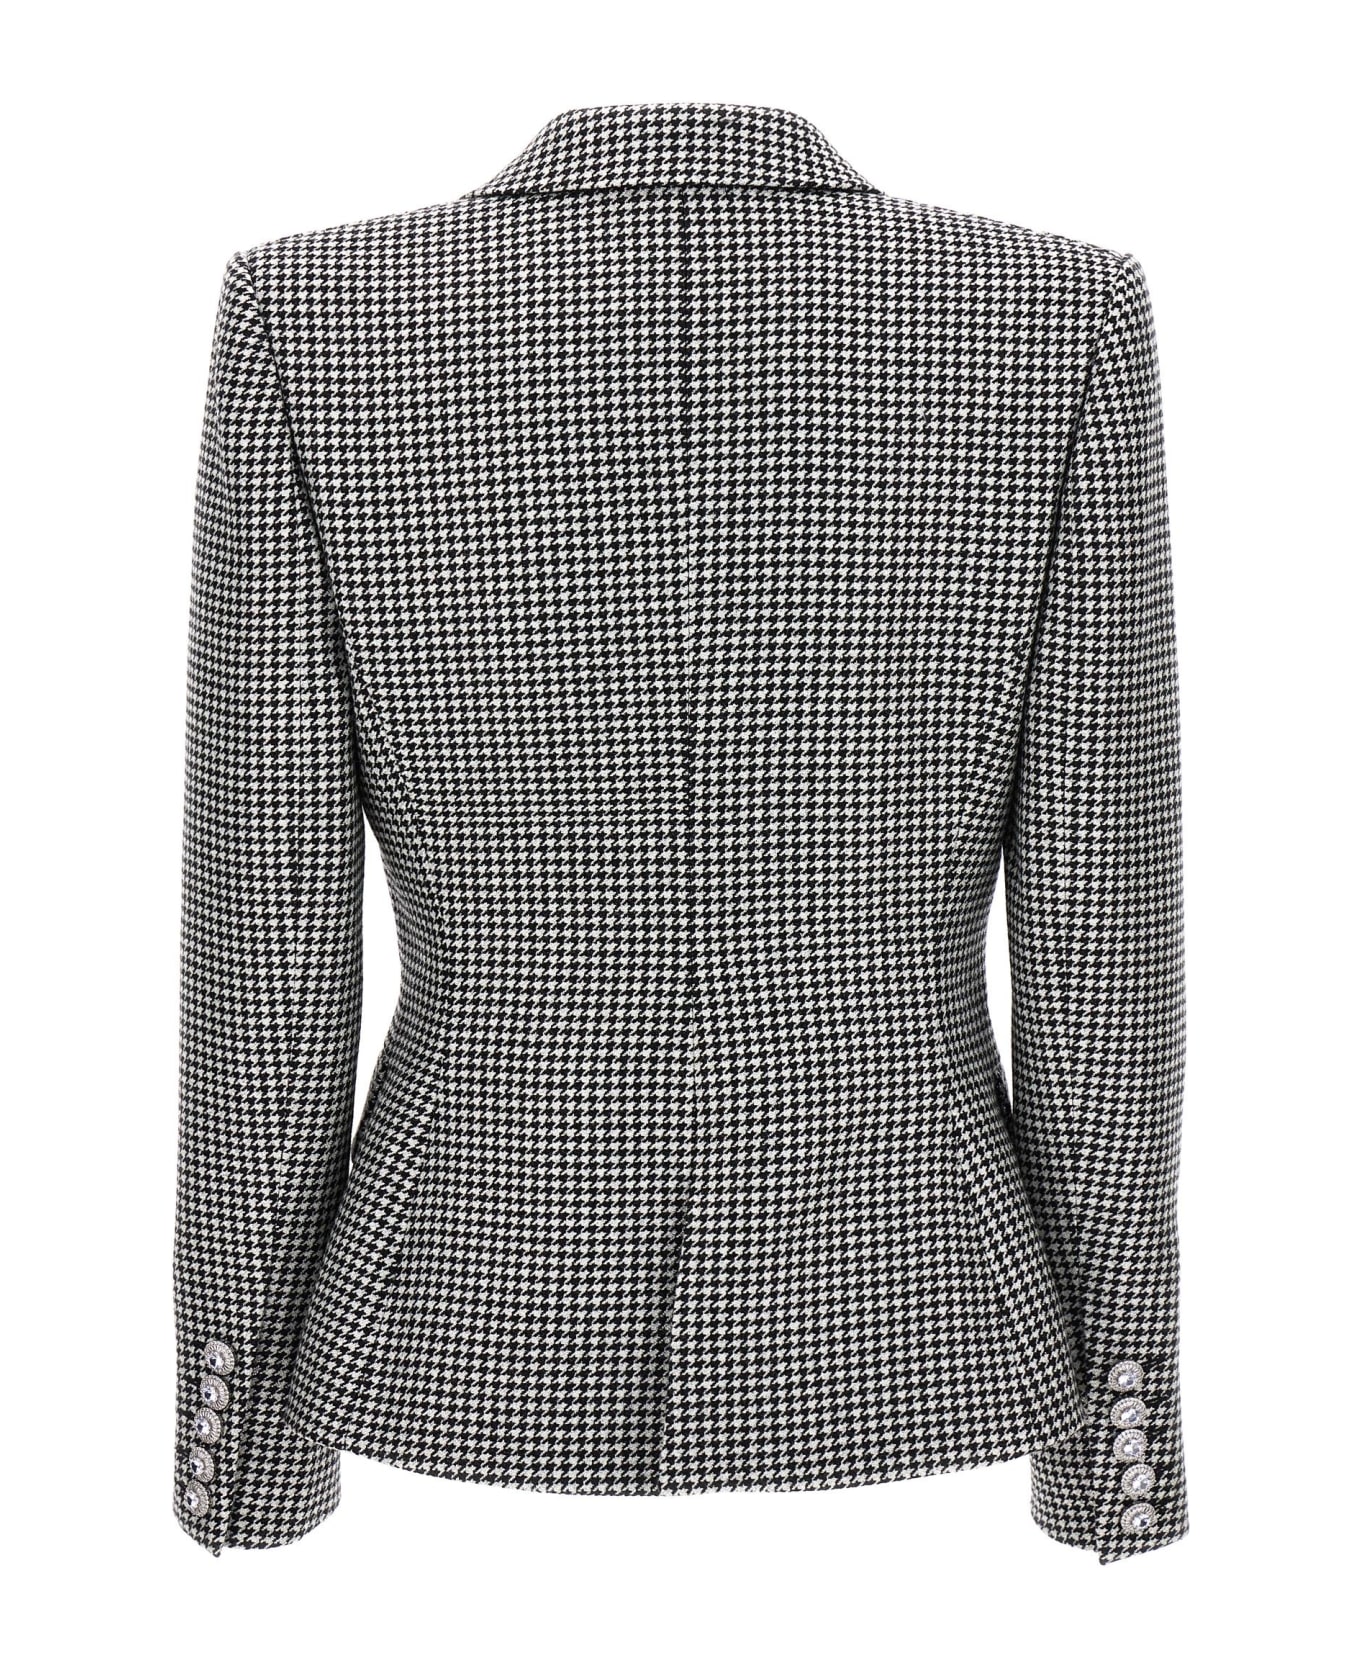 Alexandre Vauthier Double-breasted Houndstooth Blazer - White/Black